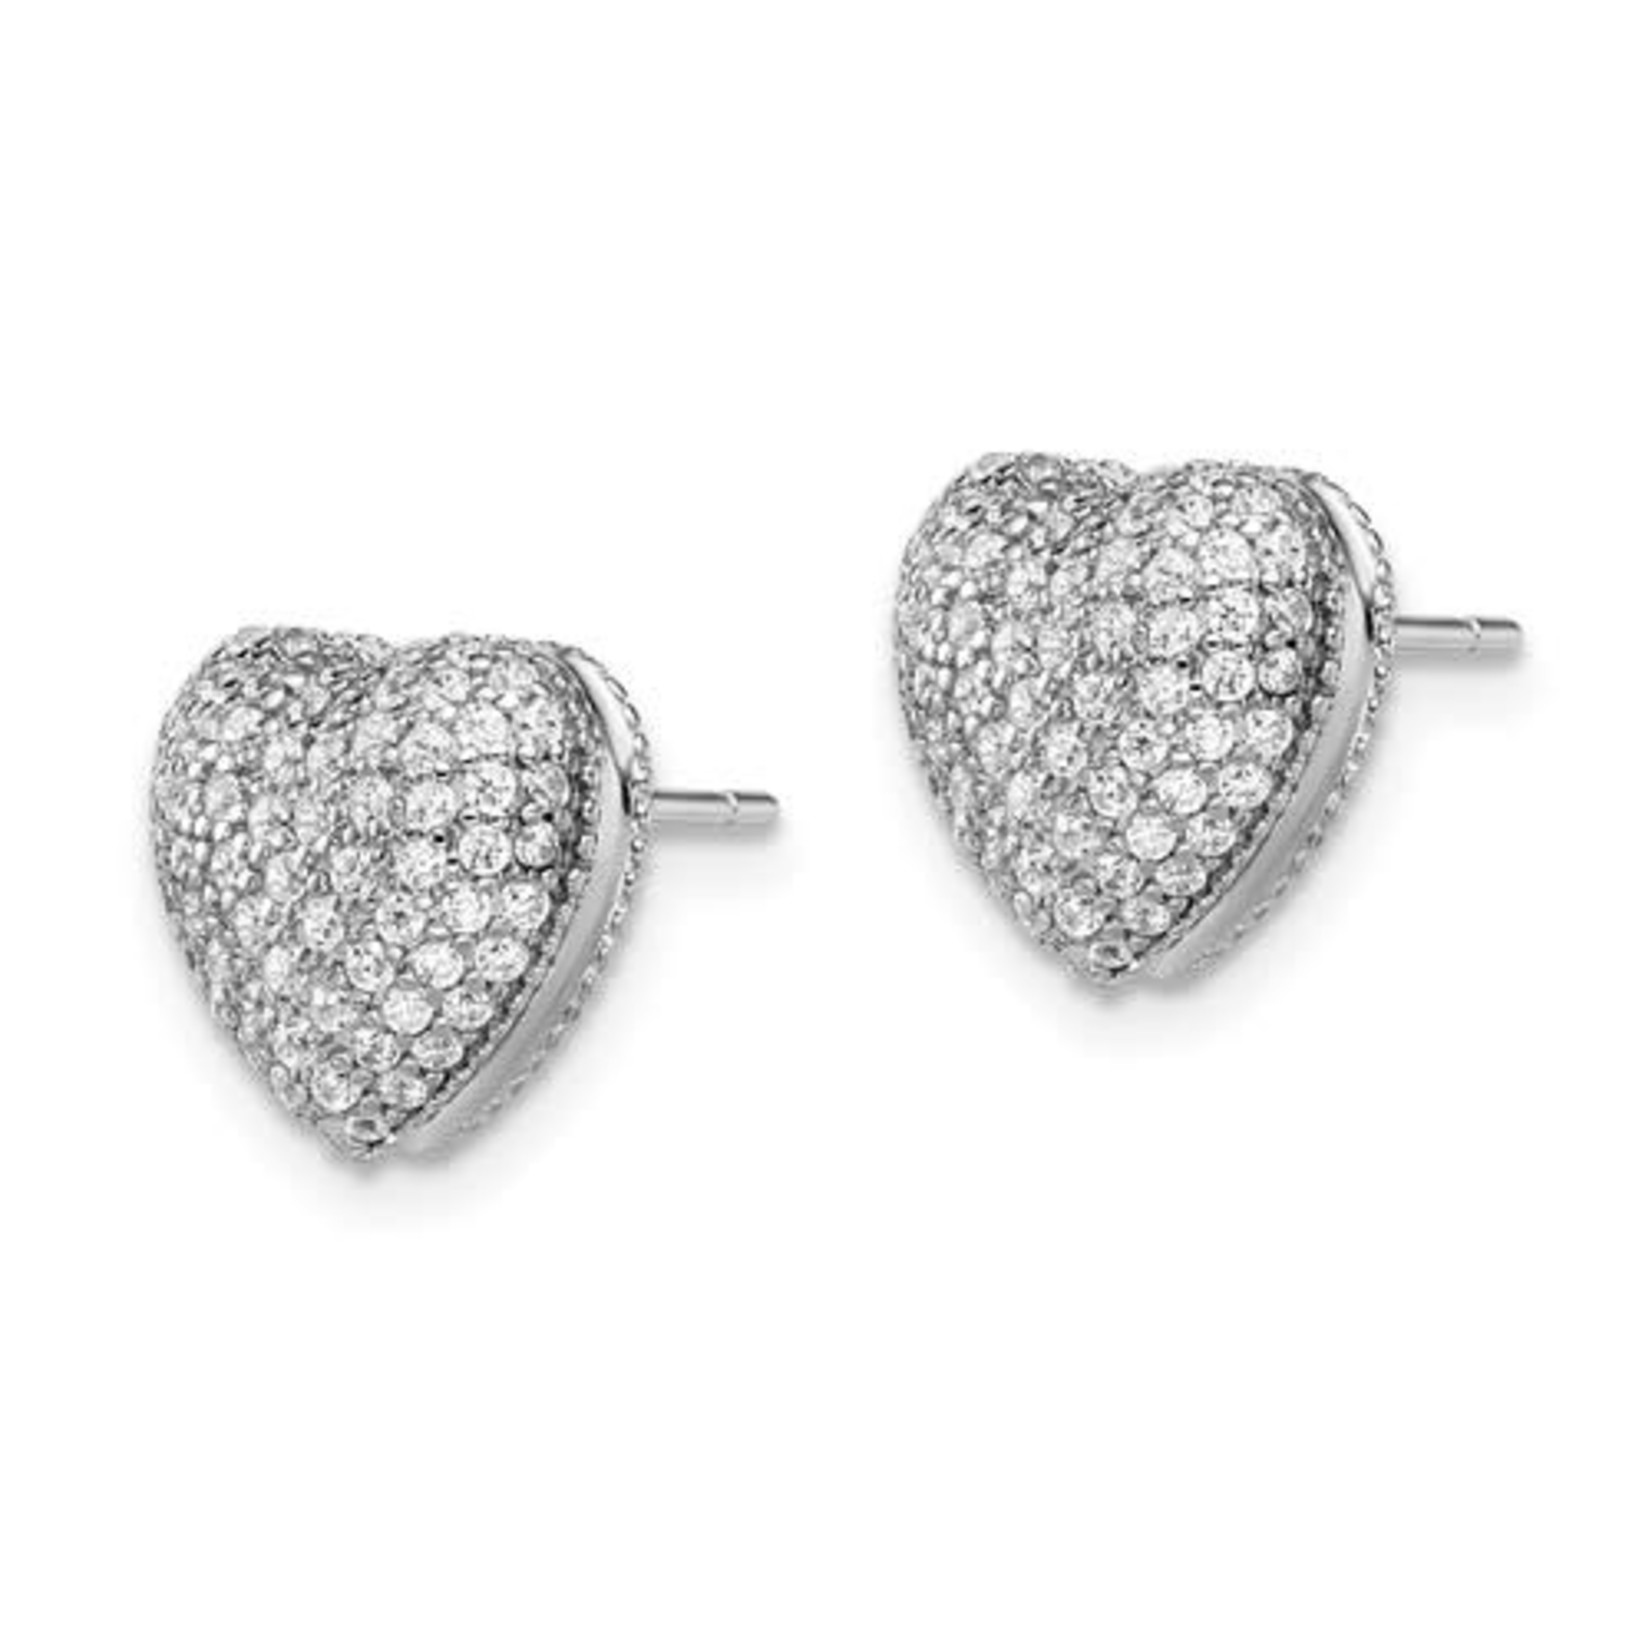 This Is Life Glitz My Heart Sterling Silver Earrings